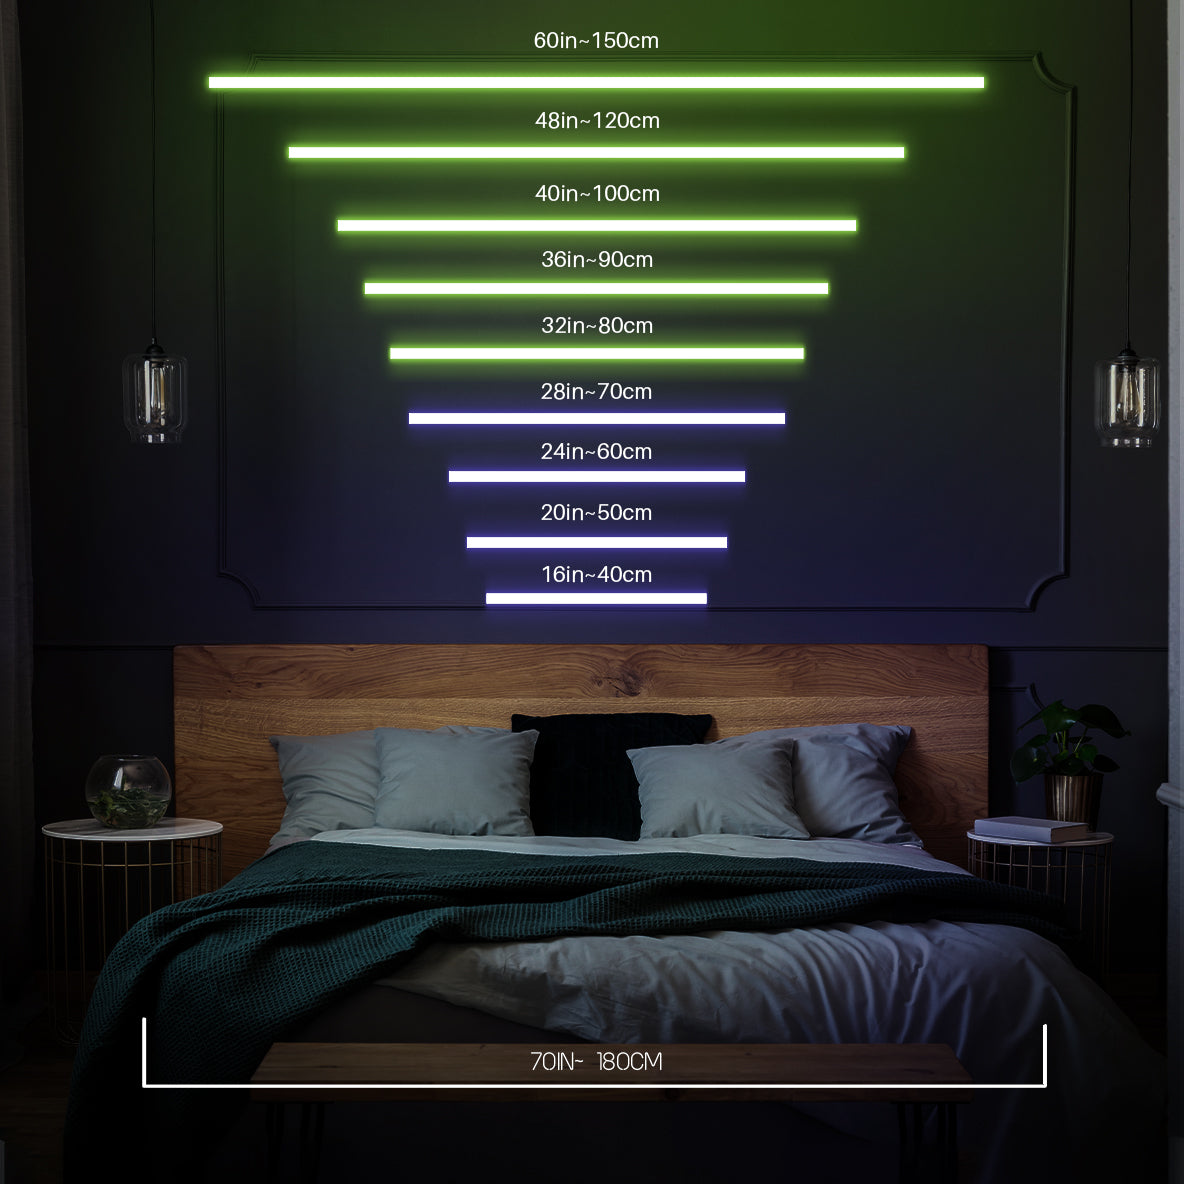 Neon Recording Sign Classic Streaming Game Led Light